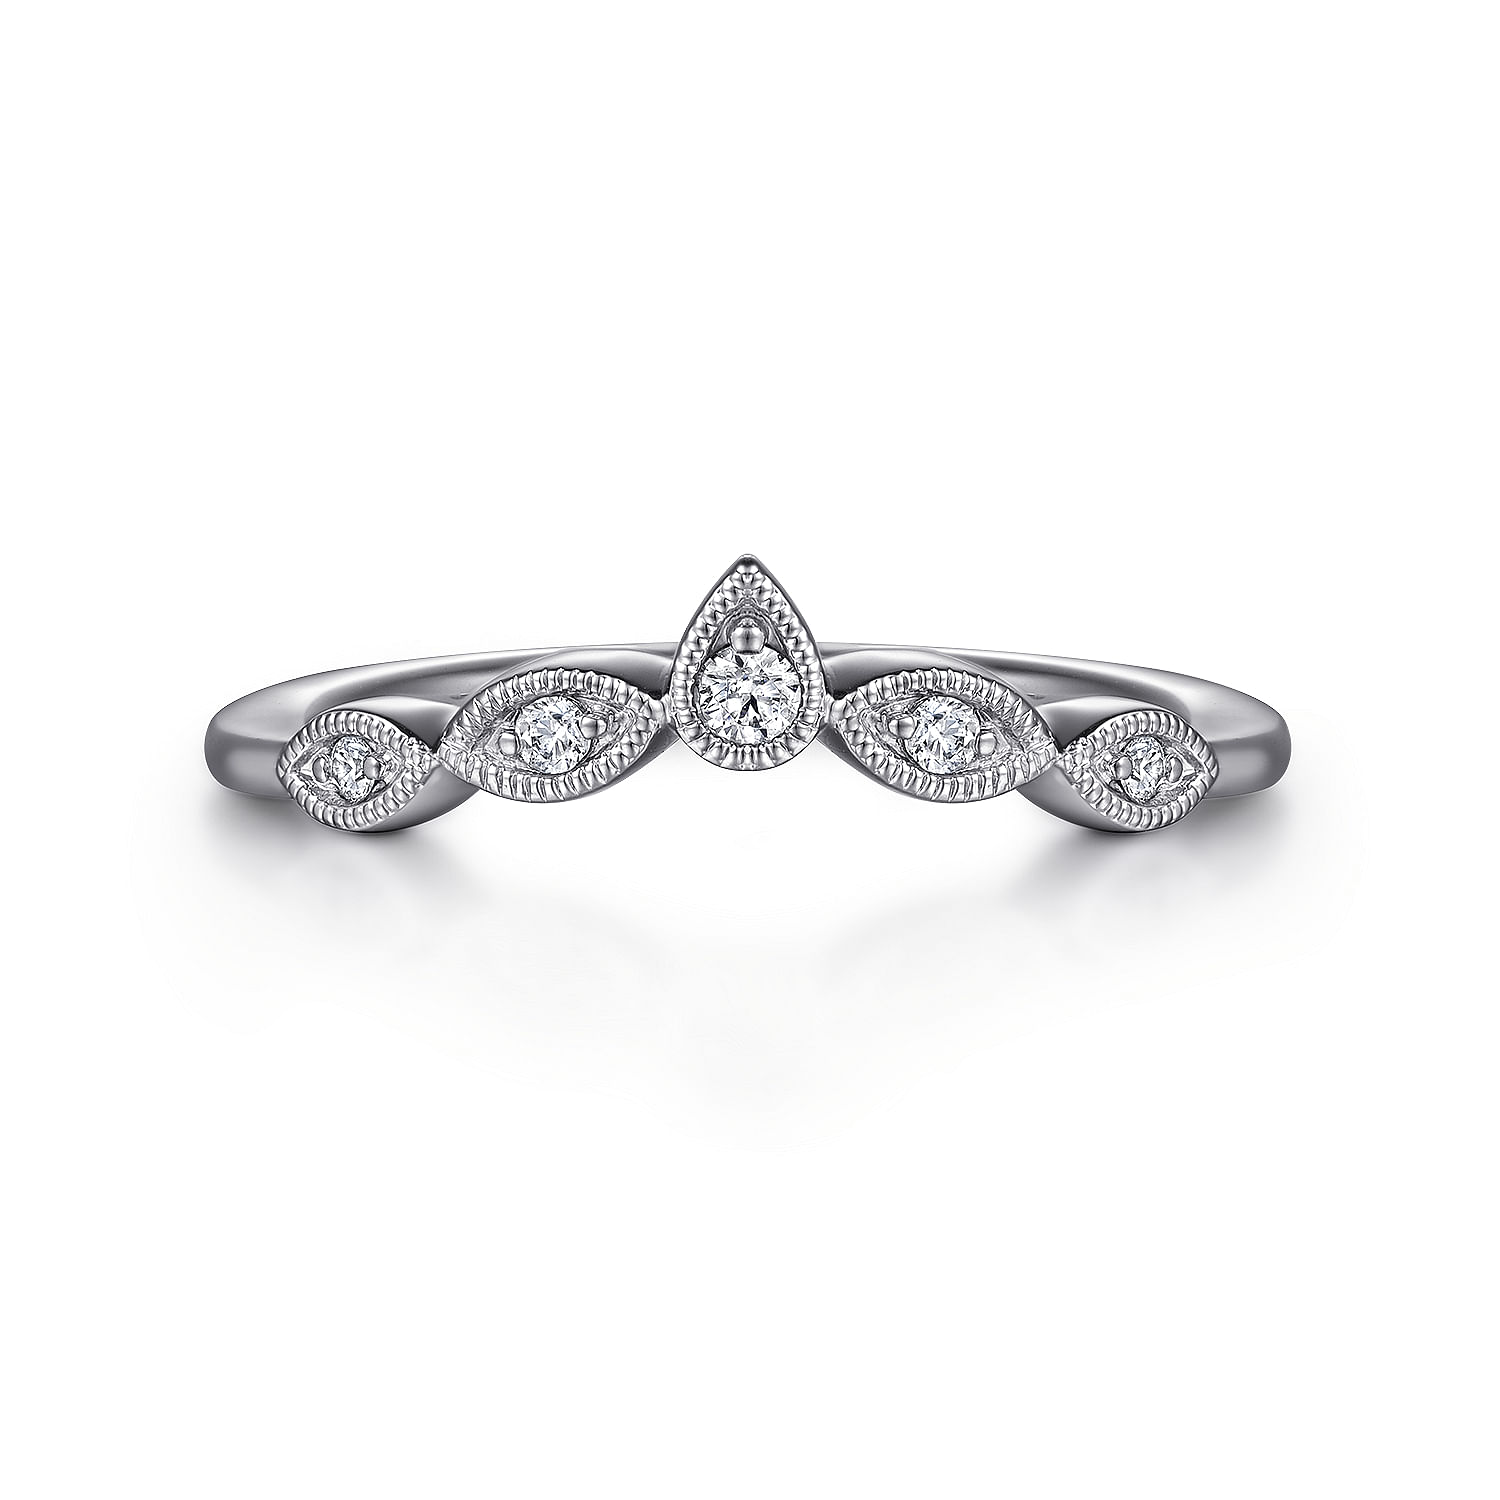 Vintage Inspired 14K White Gold Curved Gold Diamond Anniversary Band